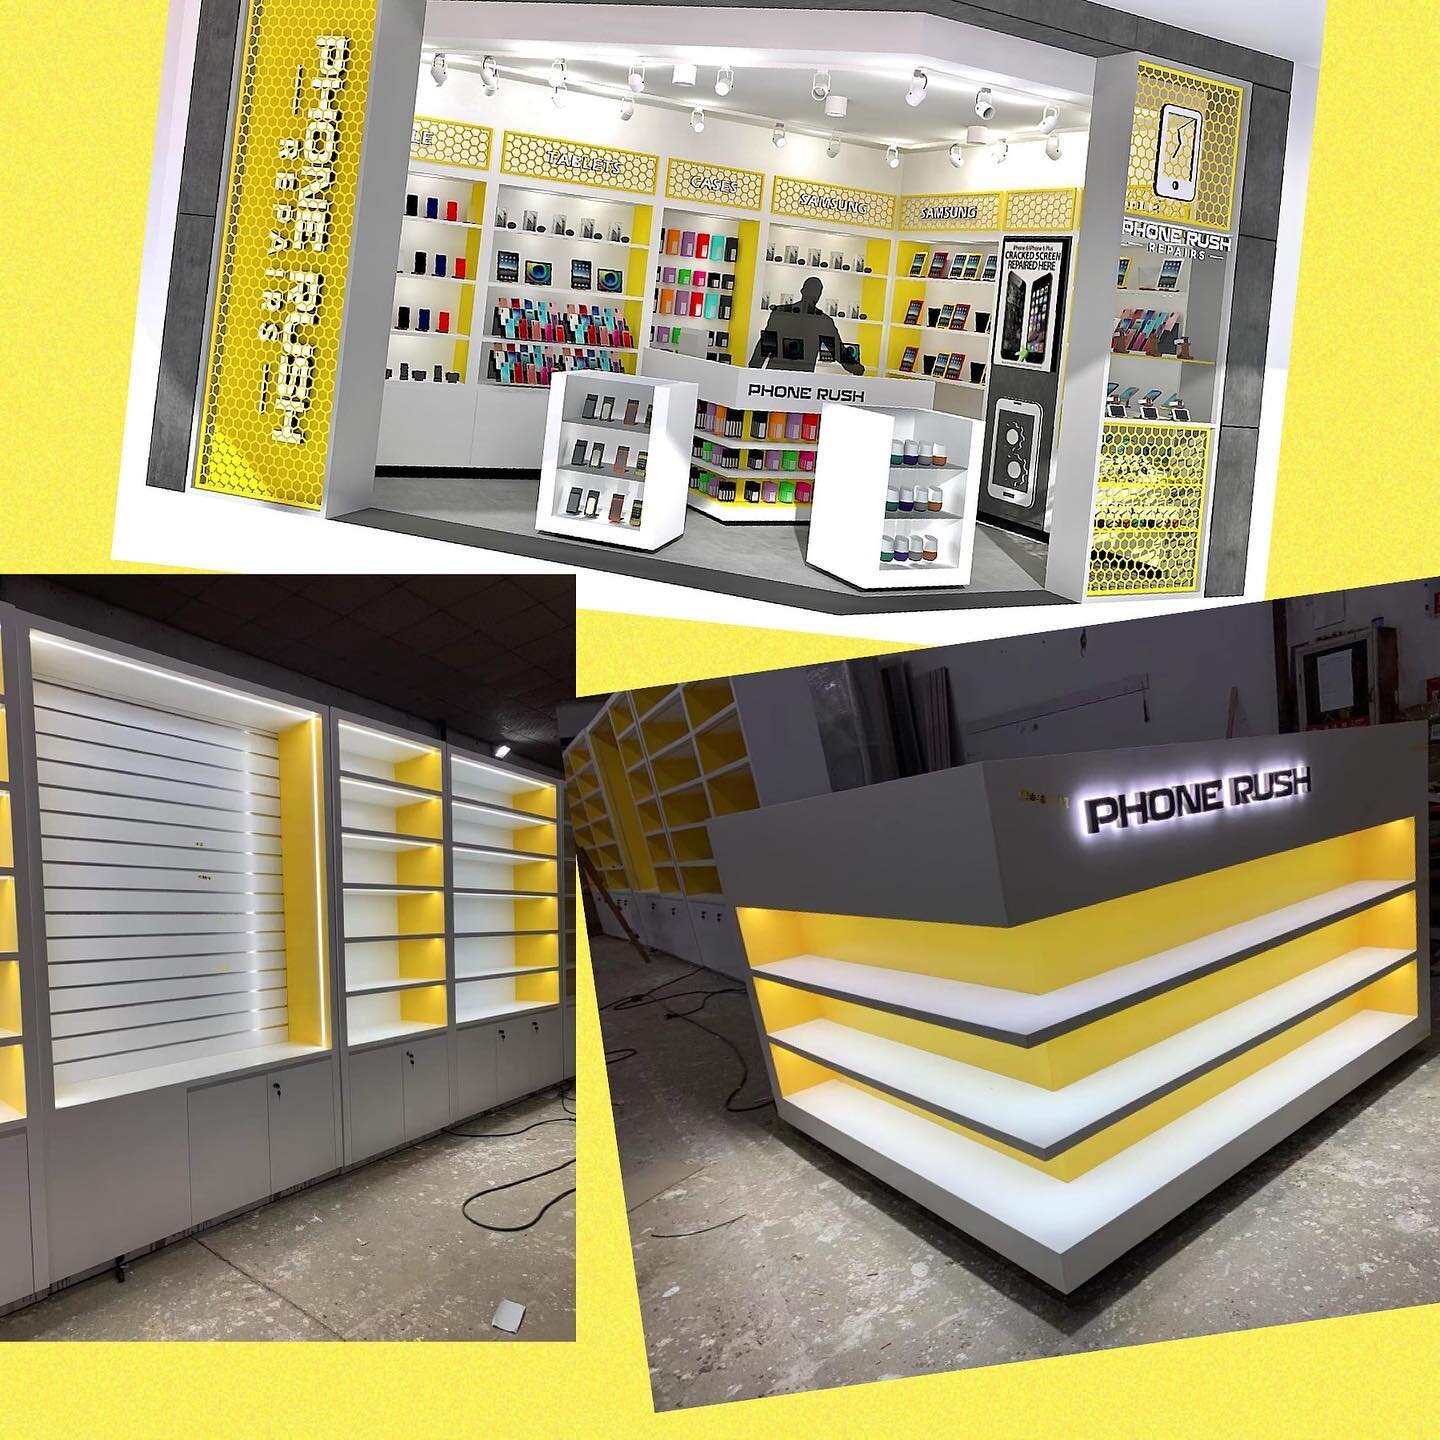 End of week progress pics from the clients joinery team - Loving yellow!
#phoneshop #yellow #retail #retaildesign